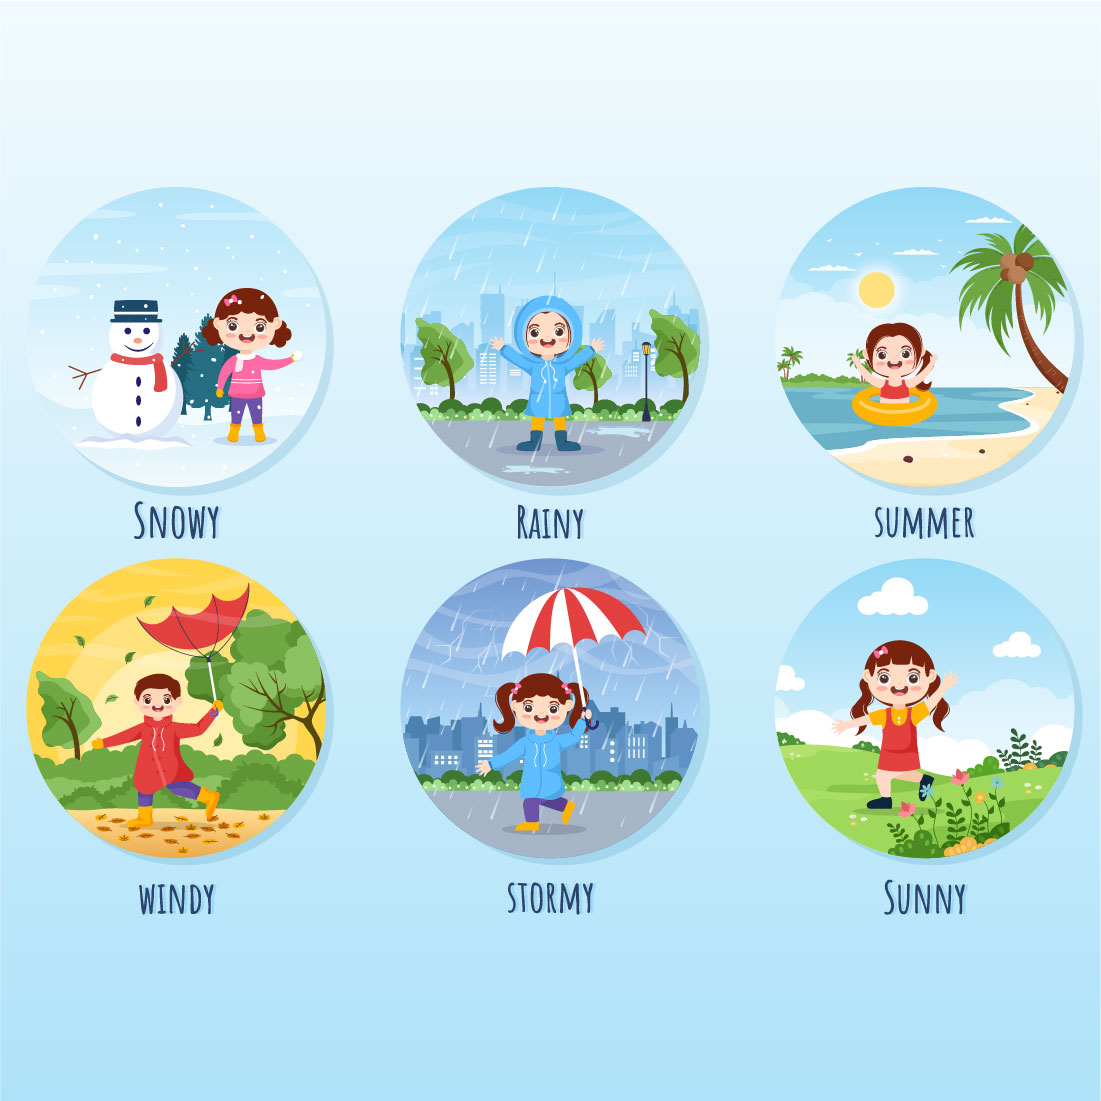 11 Types of Weather Conditions Illustration main cover.